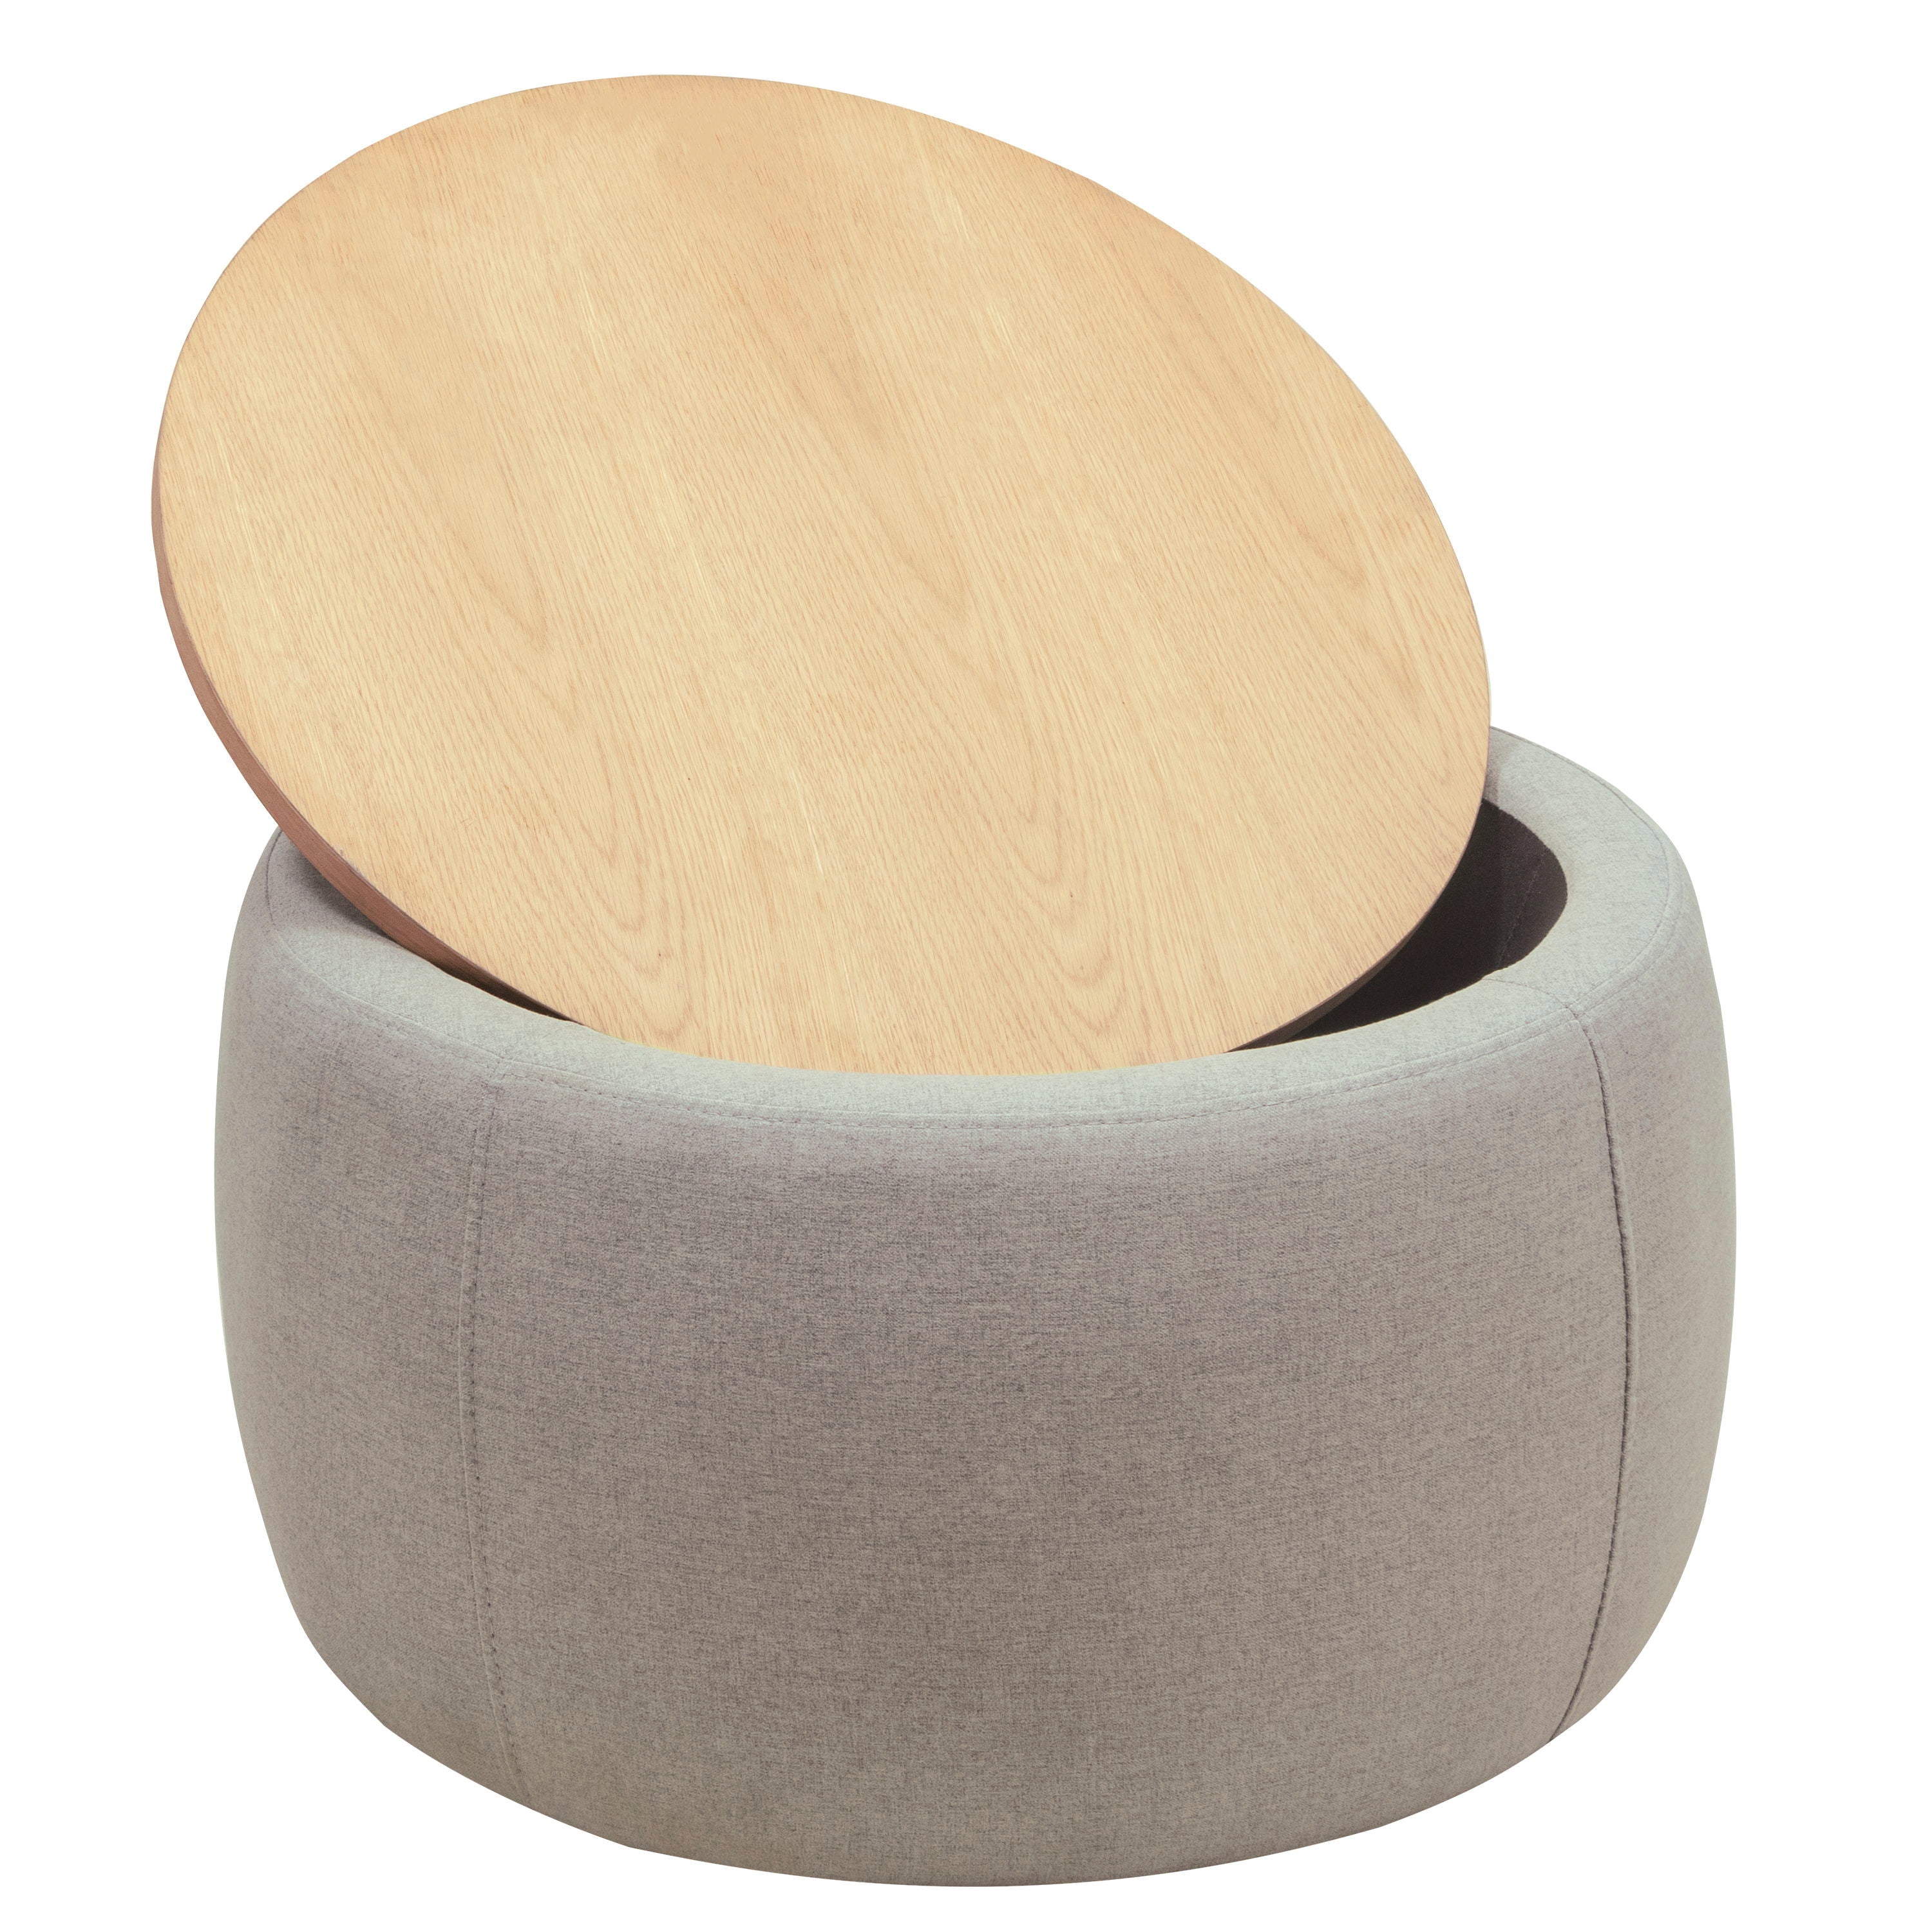 Round Storage Ottoman, 2 In 1 Function, Work As End Table And Ottoman, Gray (25.5" X25.5" X14.5" )